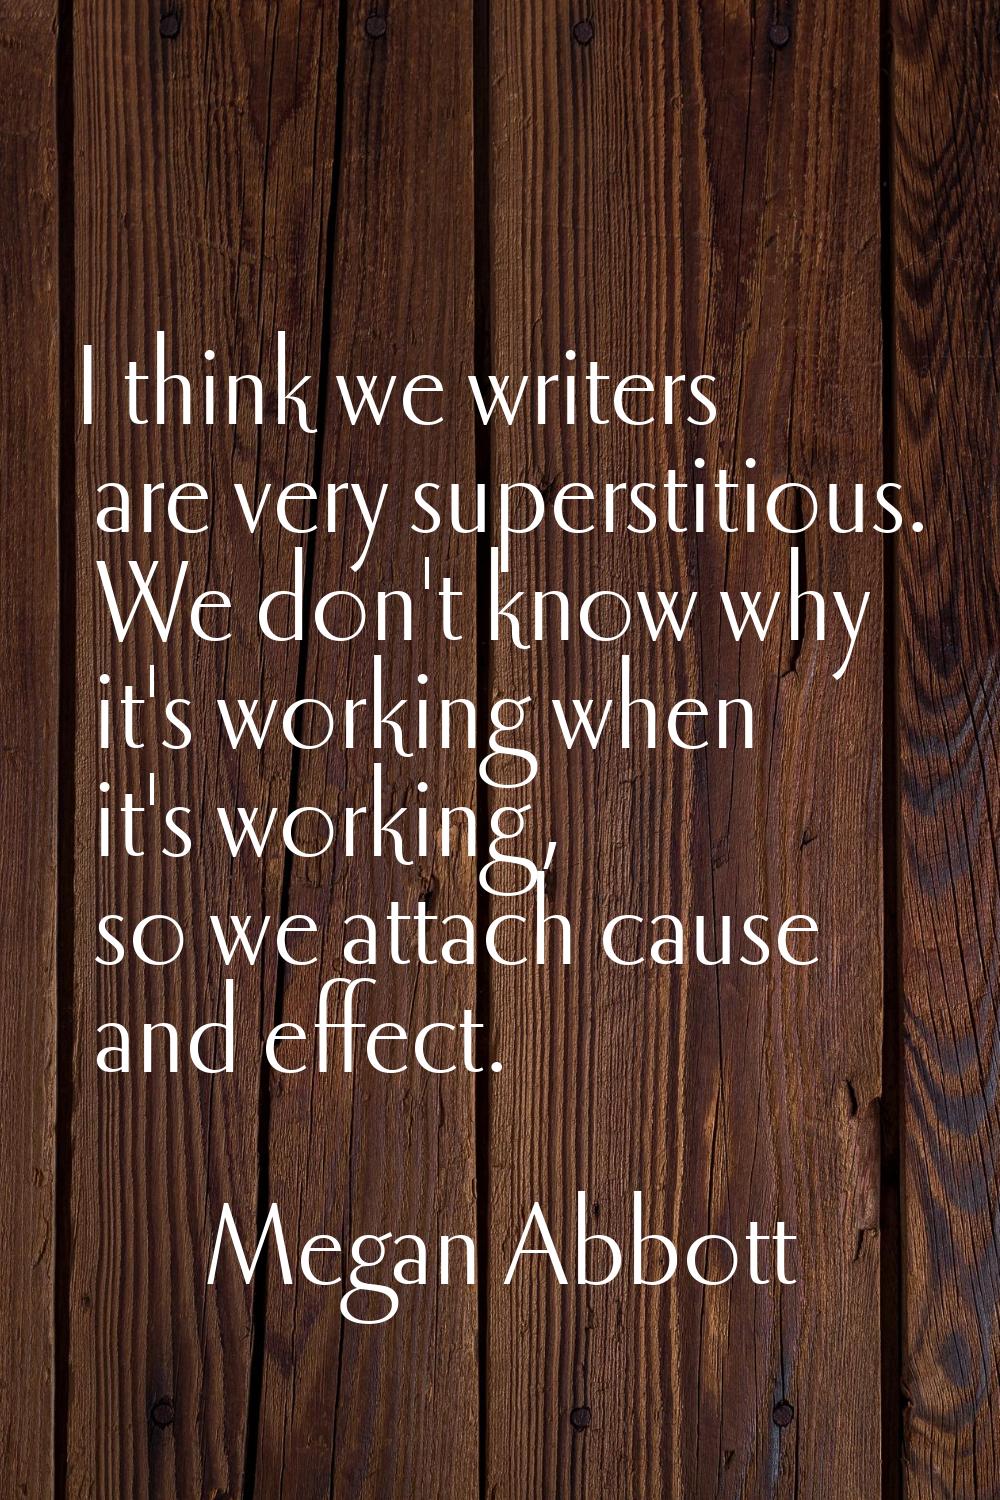 I think we writers are very superstitious. We don't know why it's working when it's working, so we 